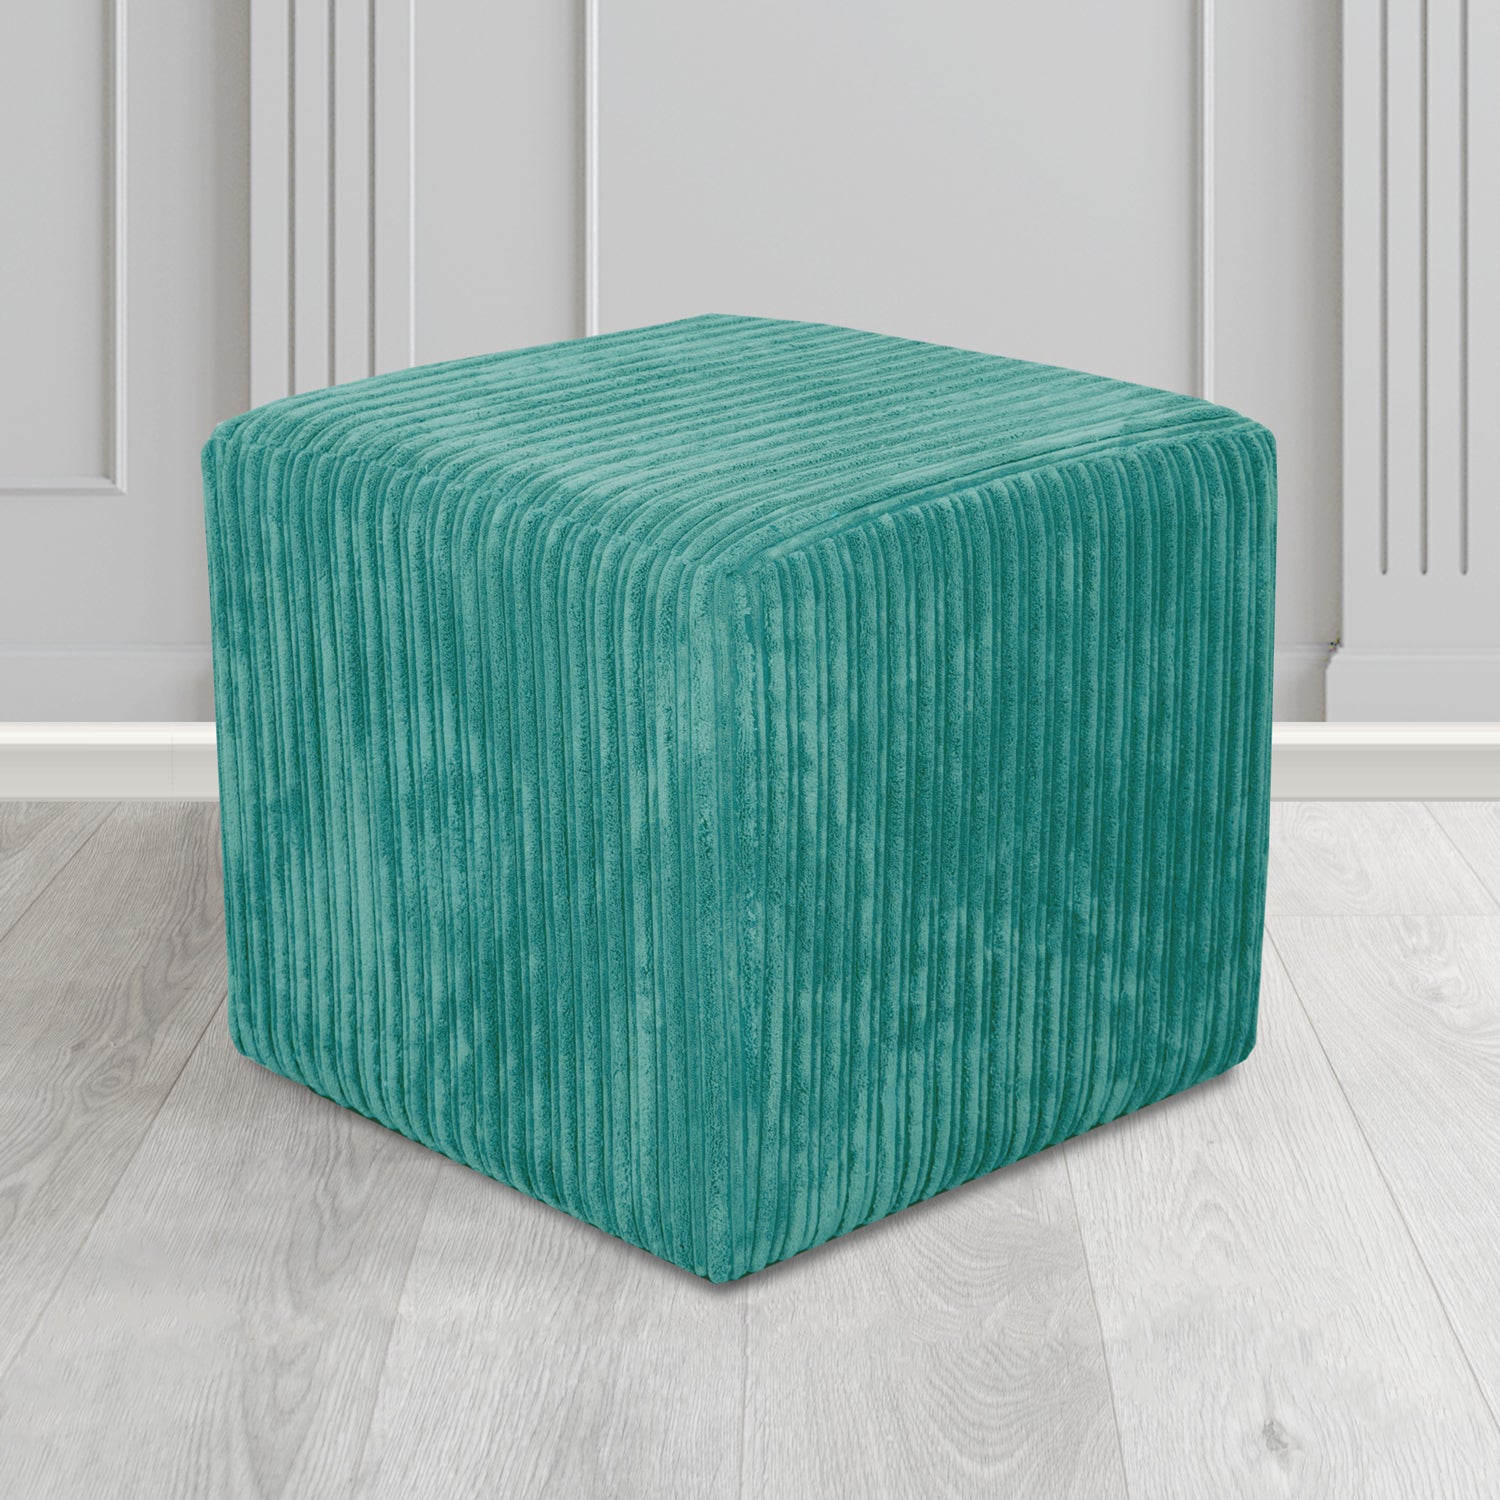 Paris Conway Teal Plain Texture Fabric Cube Footstool (6586992394282)